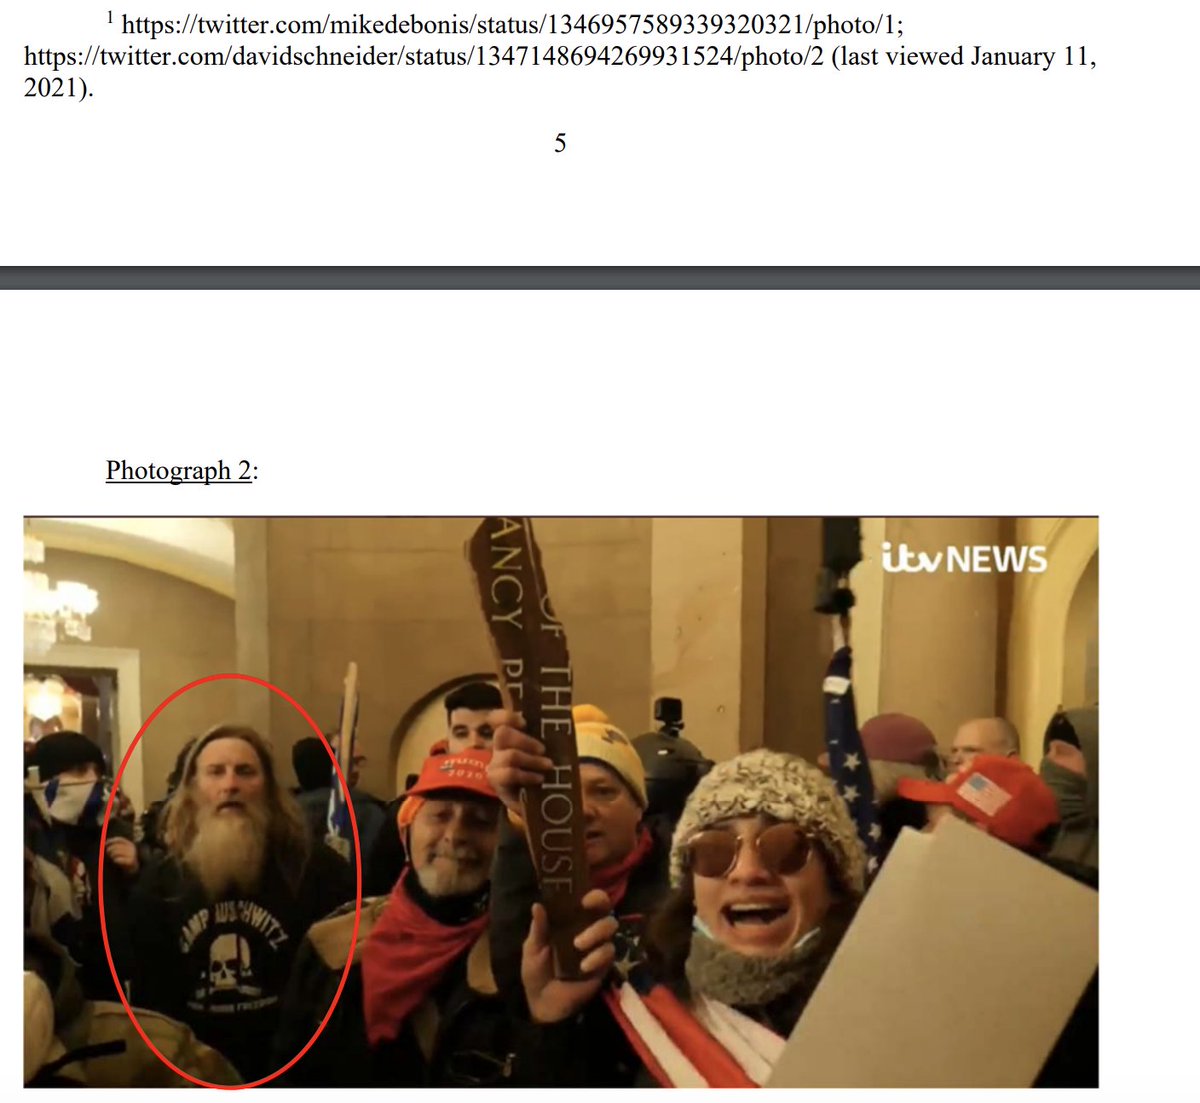 It appears this screengrab by  @mikedebonis helped police ID the man in the Nazi shirt.  https://www.justice.gov/opa/page/file/1353136/download https://twitter.com/mikedebonis/status/1346957589339320321